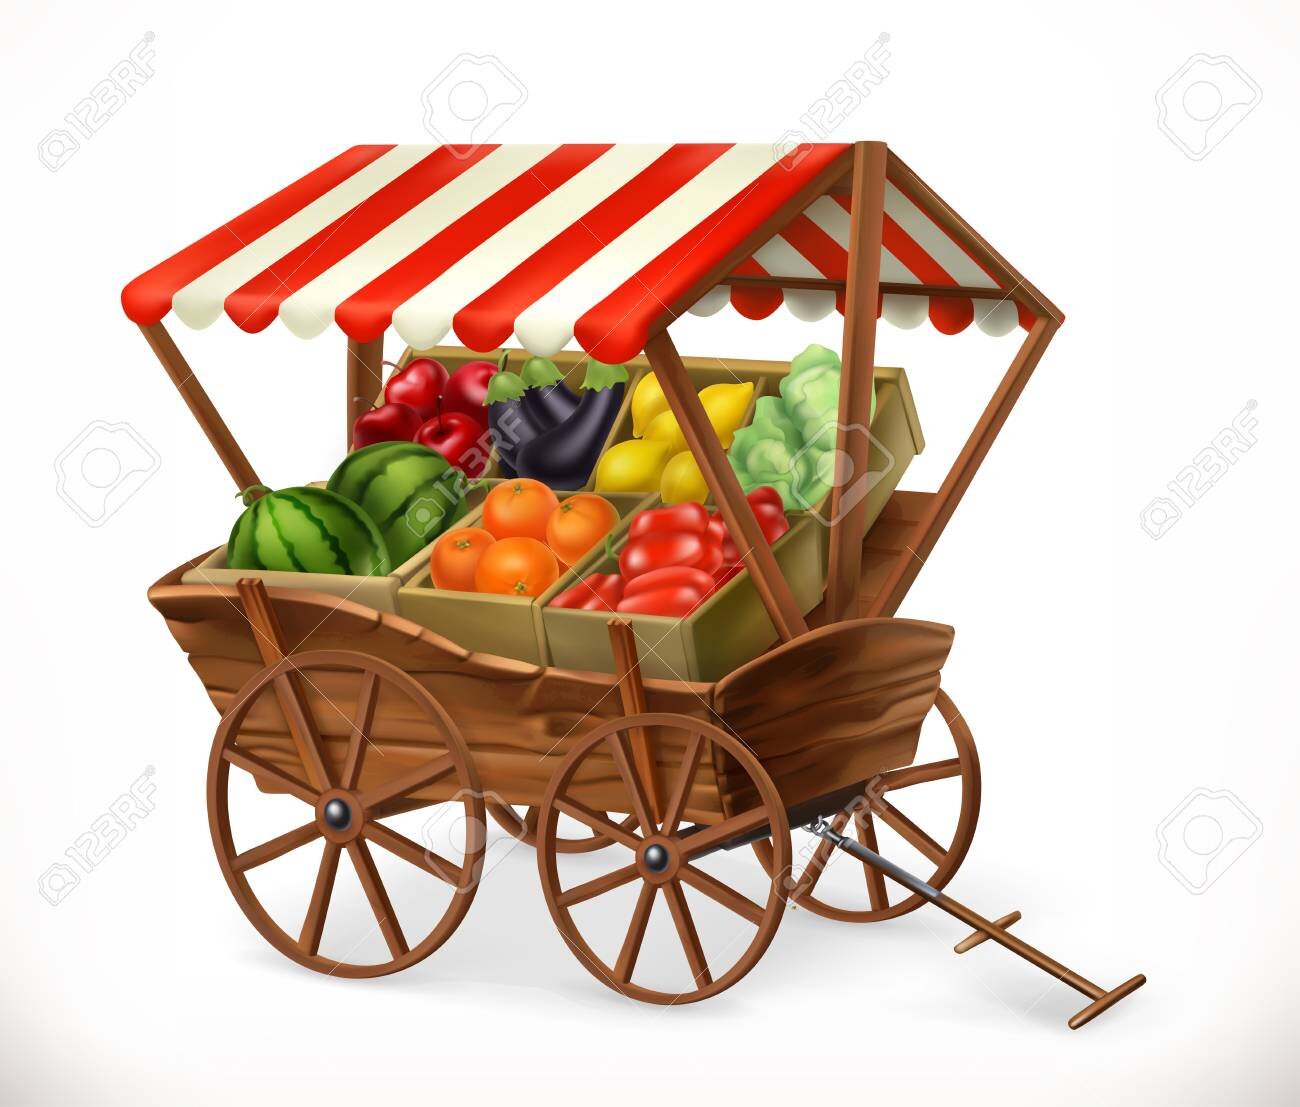 94979823-fresh-produce-market-cart-with-fruits-and-vegetables-3d-vector-icon.jpg